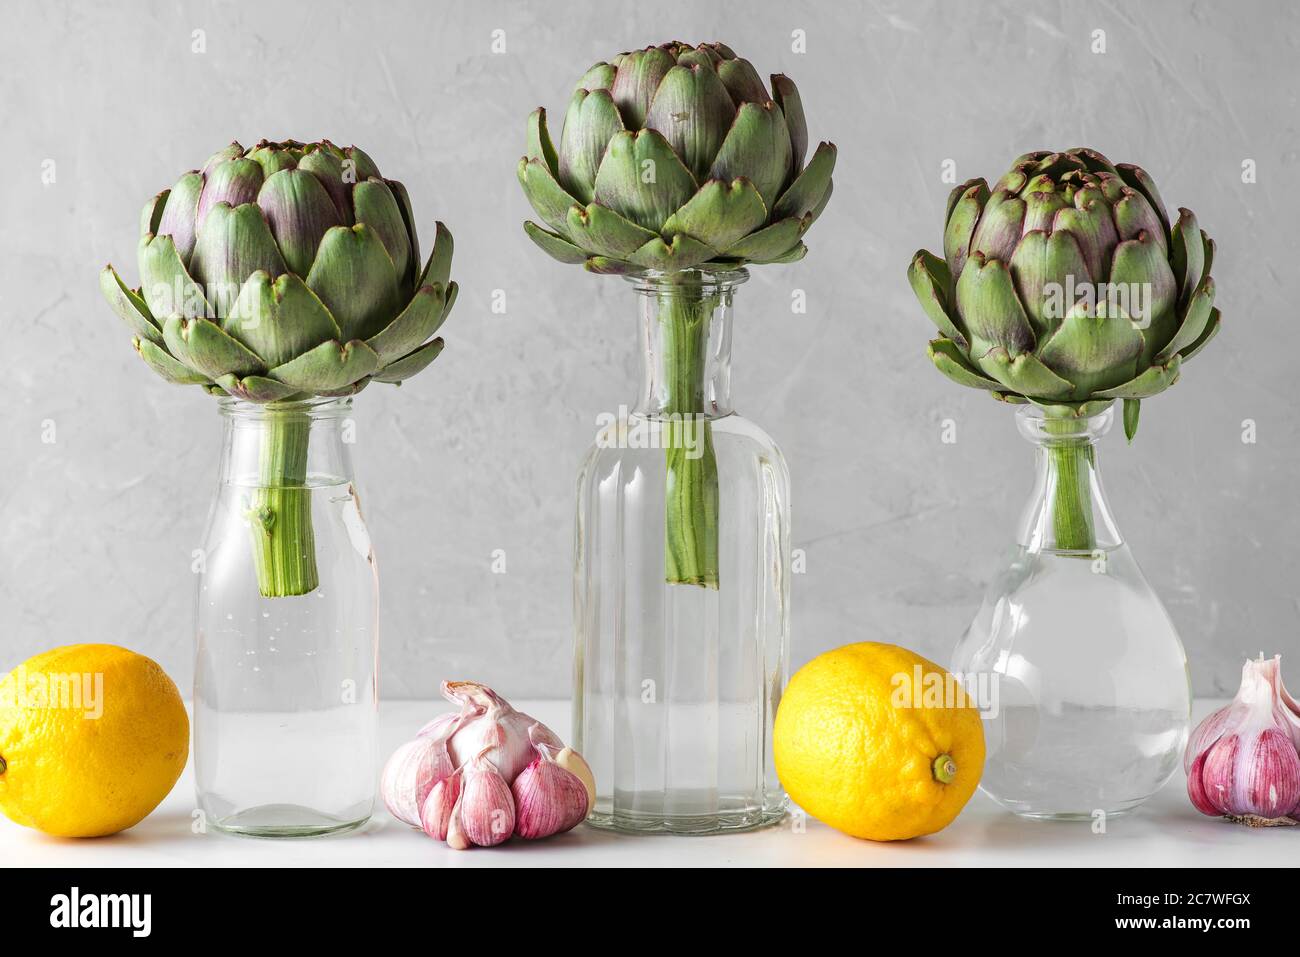 Artichoke vegetables in the bottles with lemons and garlic on white background. Creative modern food still life. Minimal concept Stock Photo